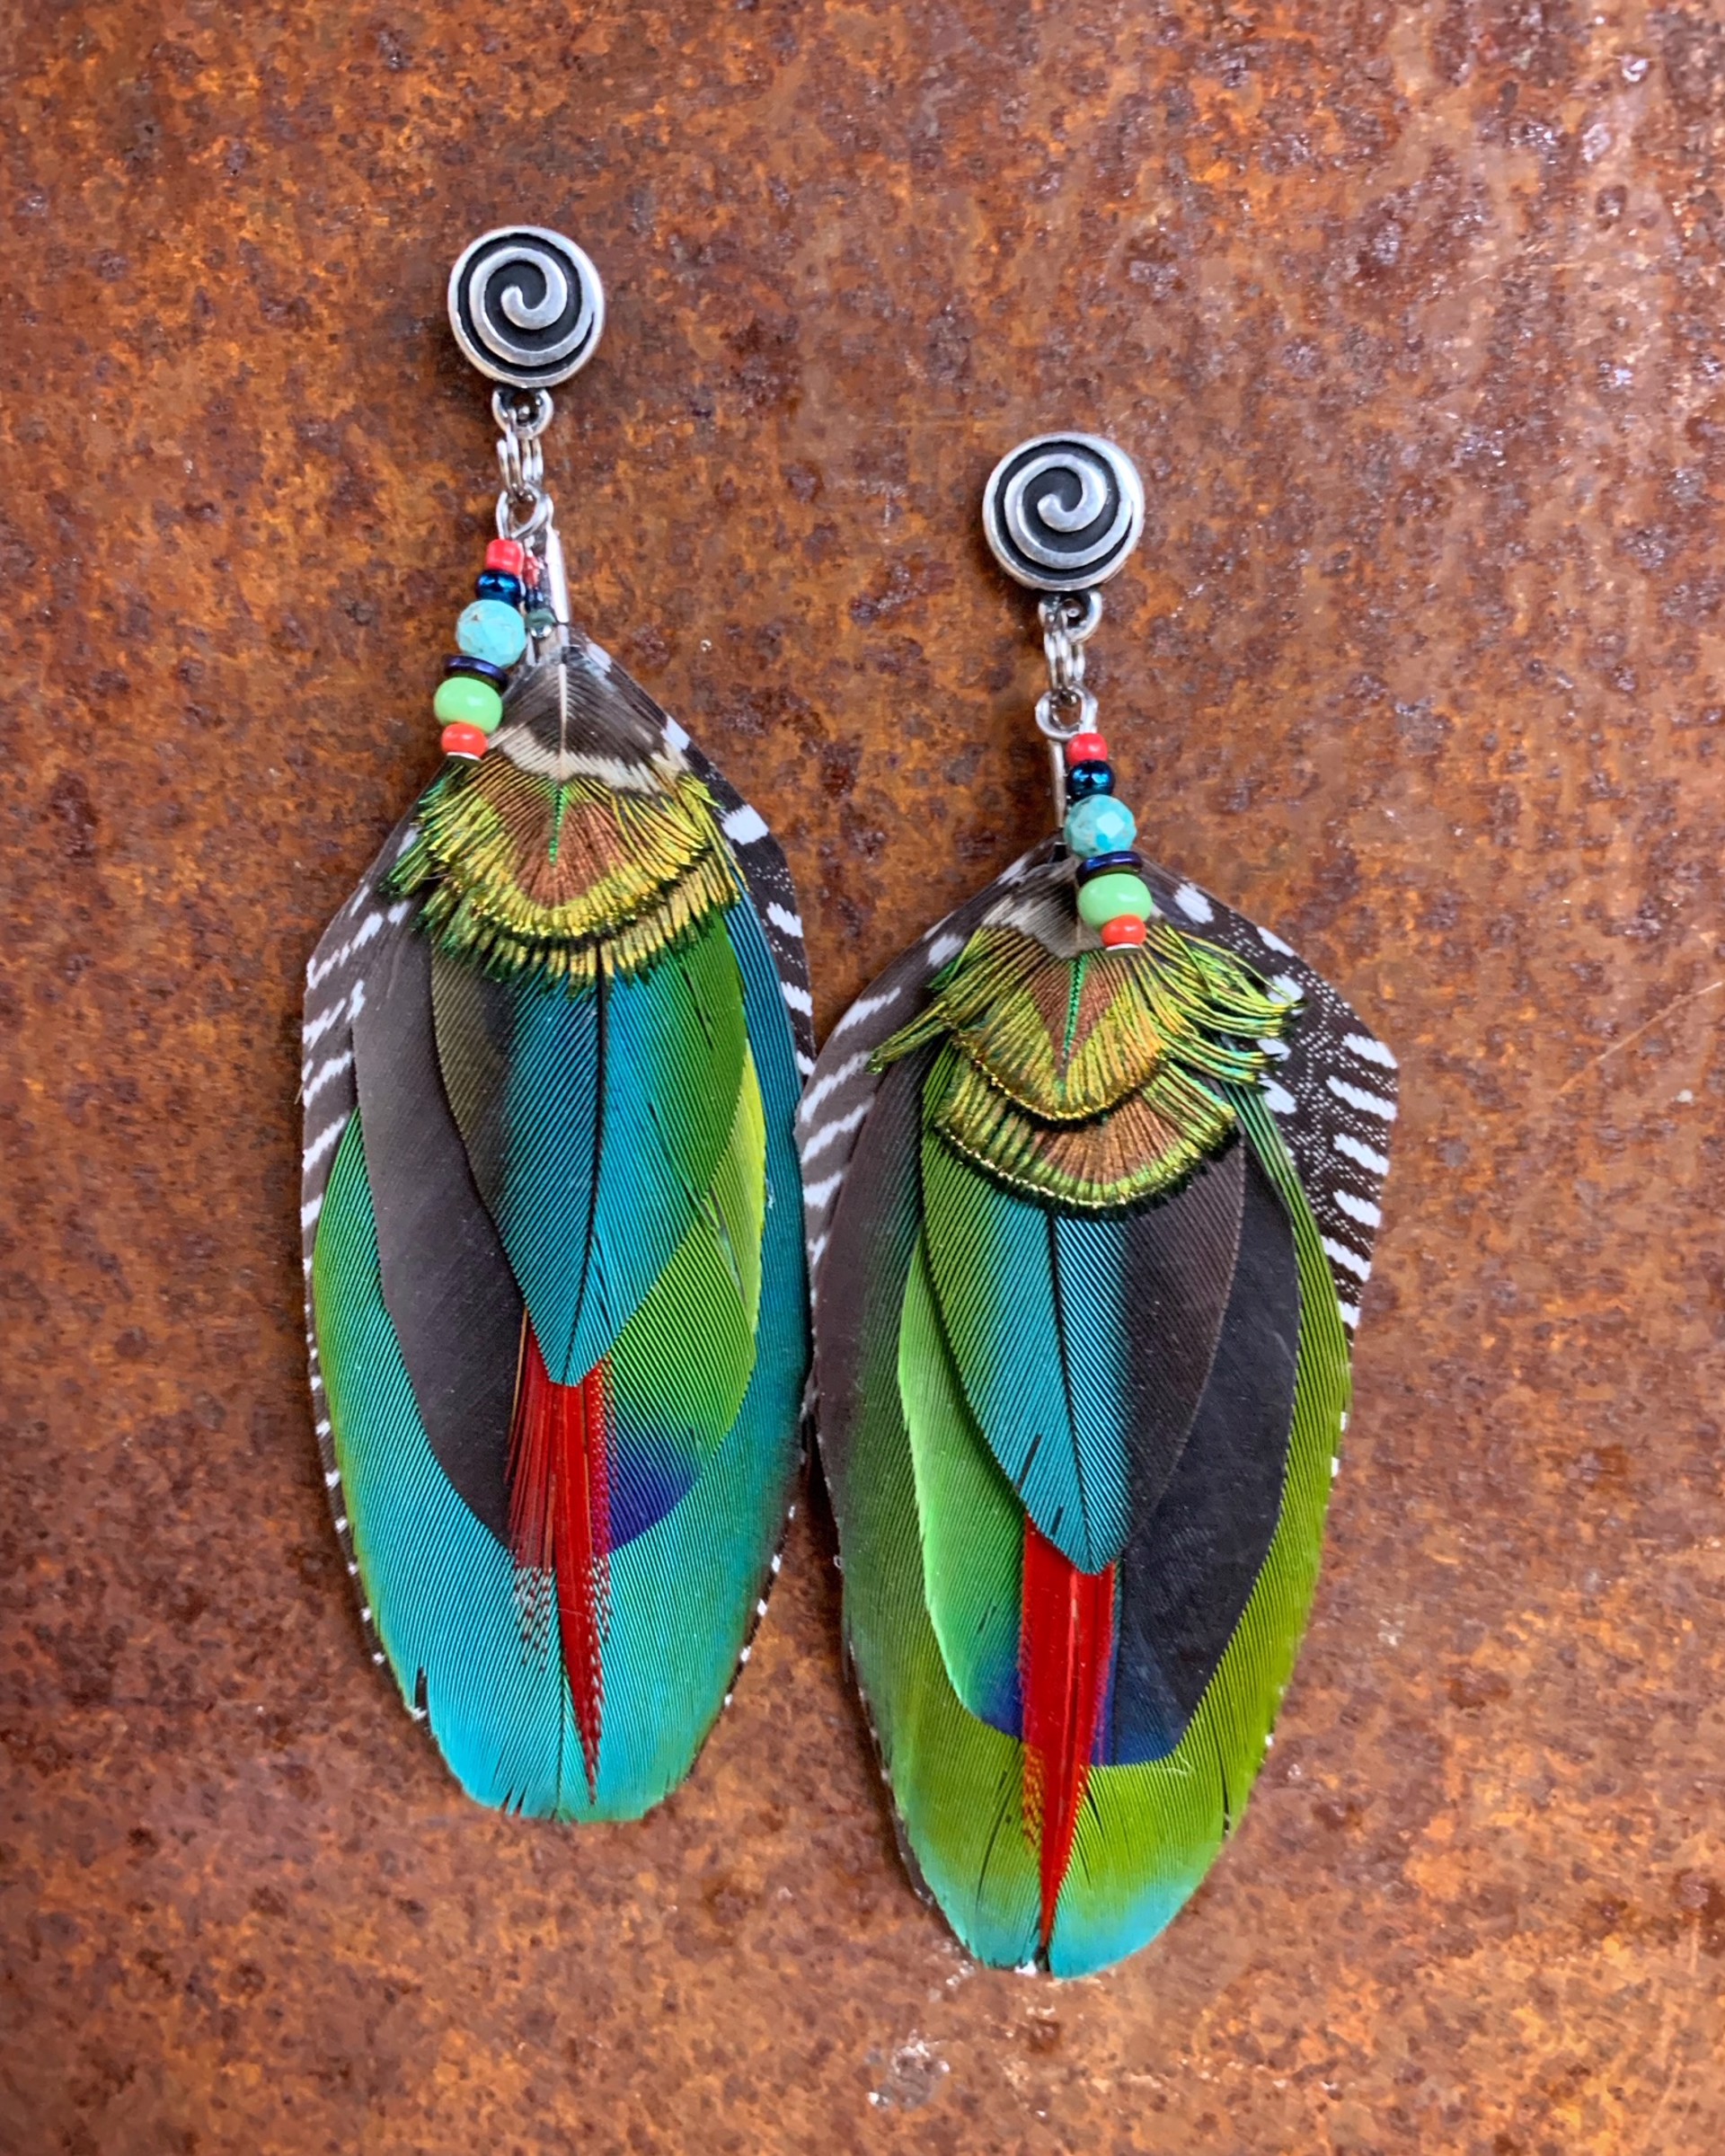 K811 Ethically Sourced Parrot Earrings by Kelly Ormsby